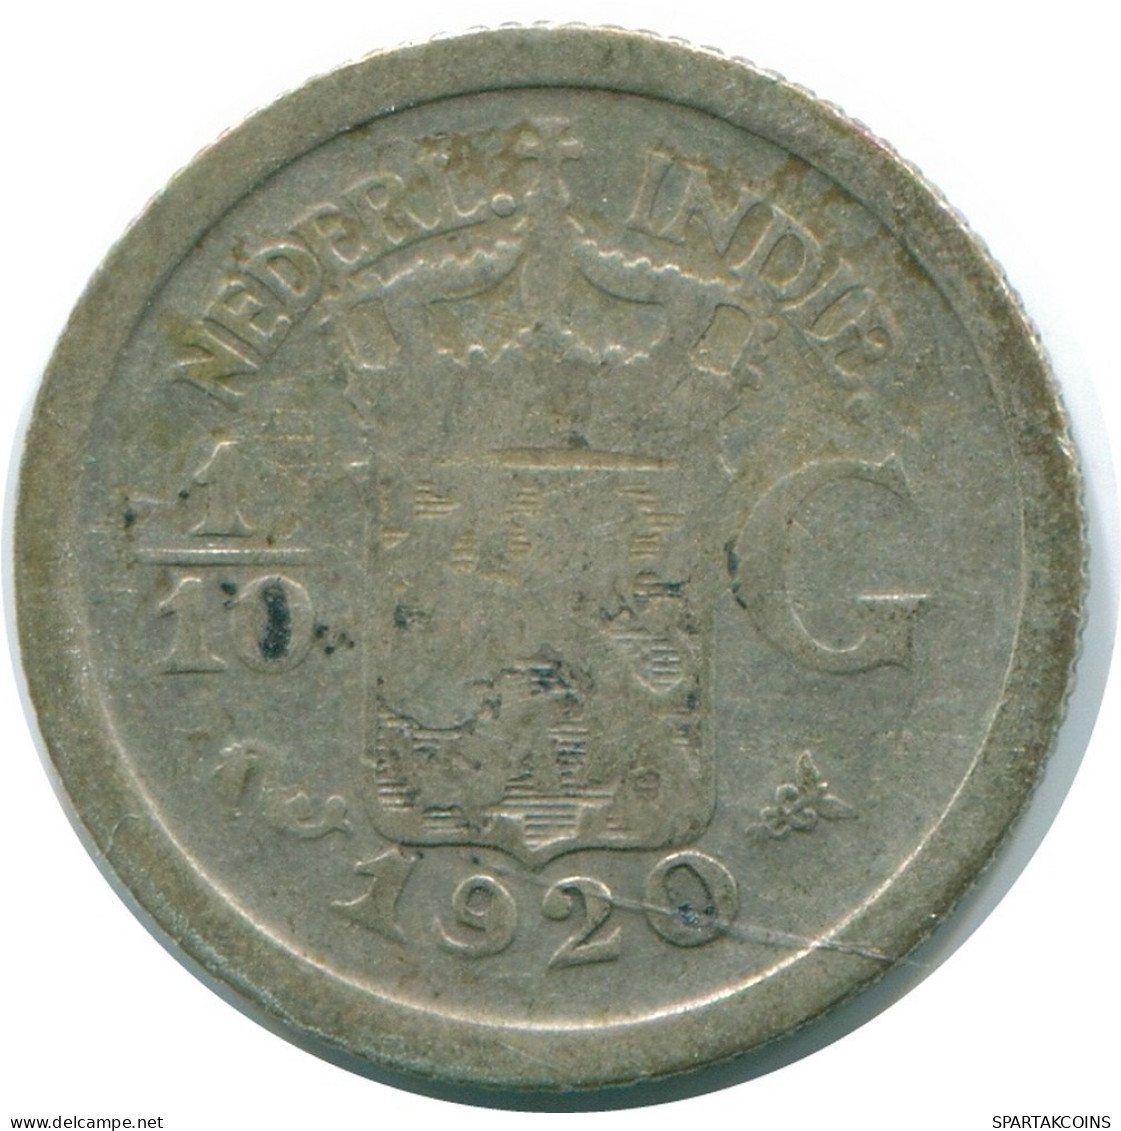 1/10 GULDEN 1920 NETHERLANDS EAST INDIES SILVER Colonial Coin #NL13406.3.U.A - Indie Olandesi